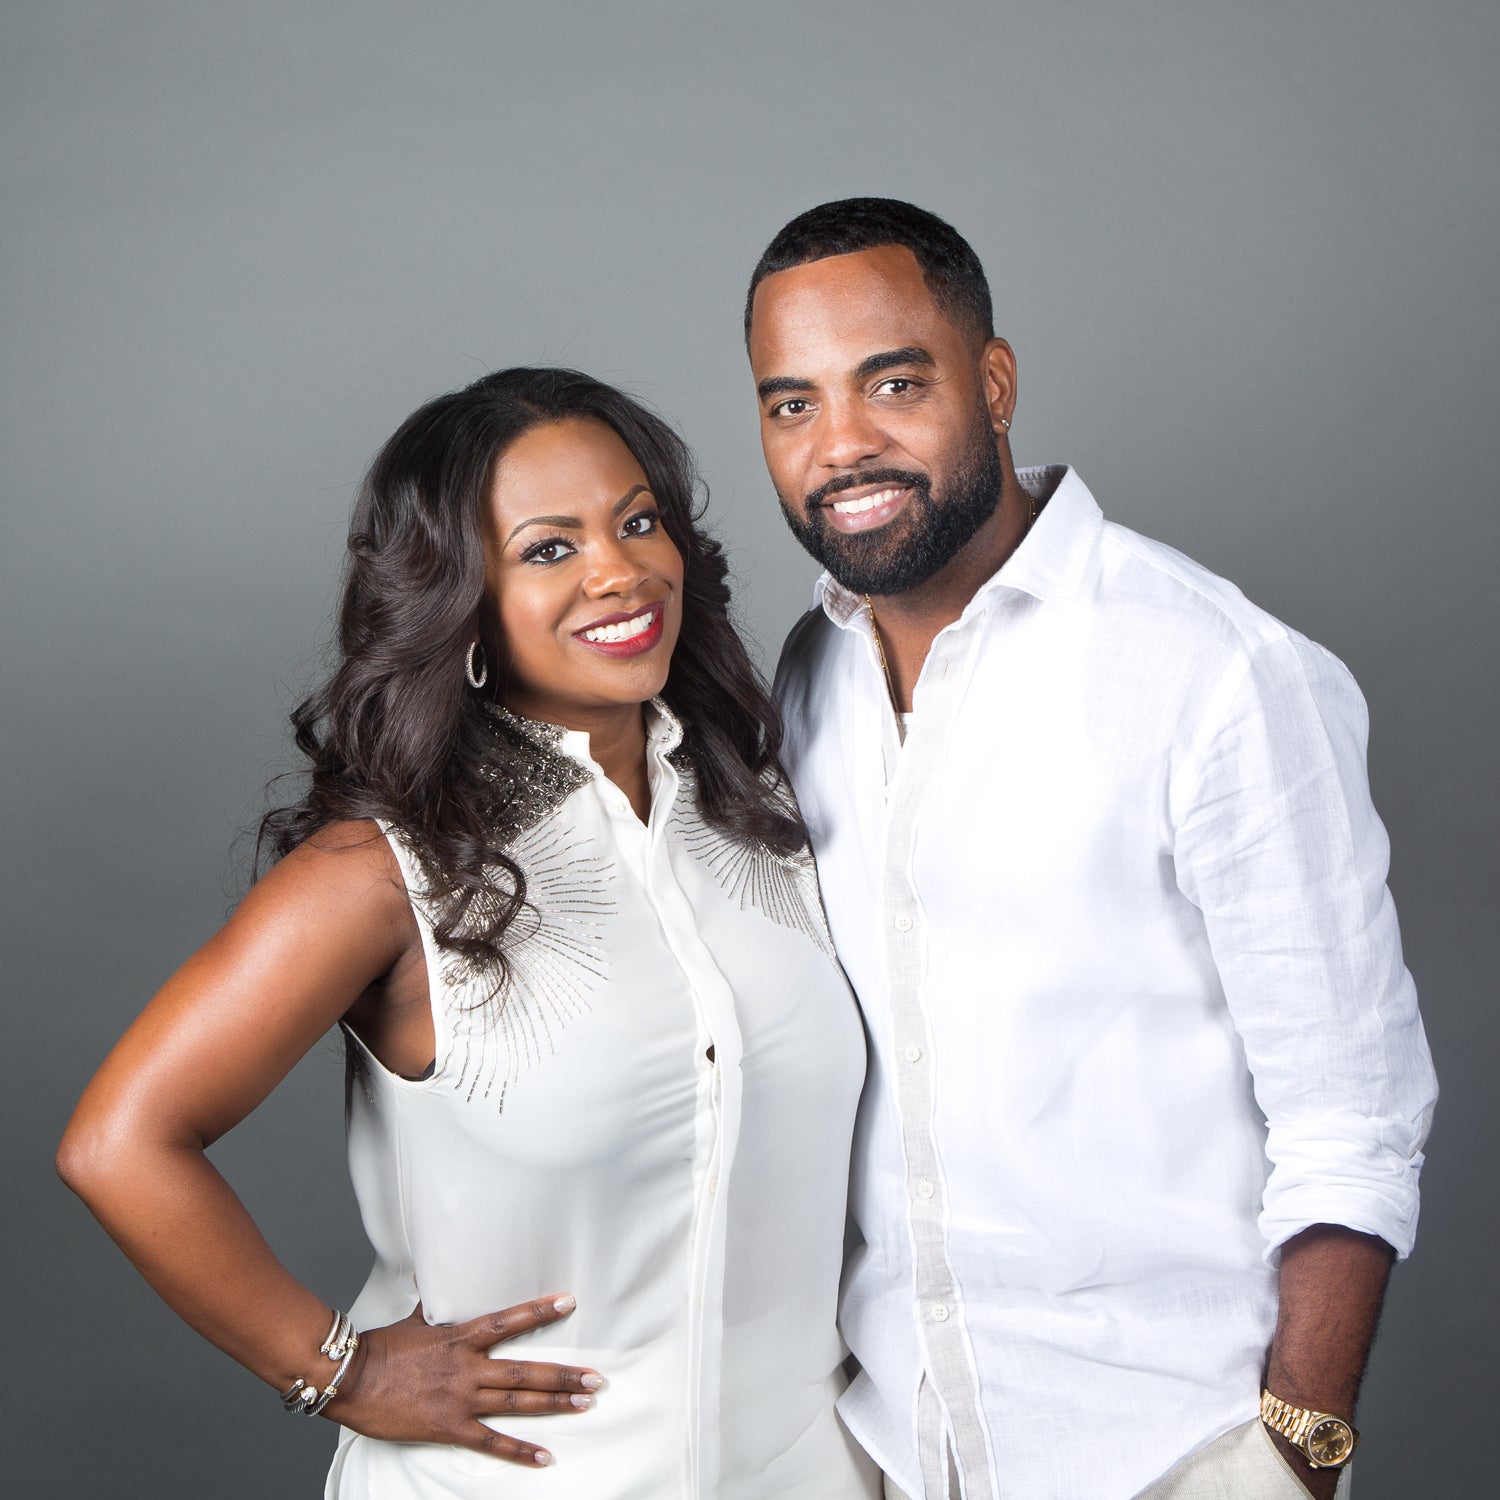 Kandi Burruss and Todd Tucker Are Expecting First Child Together